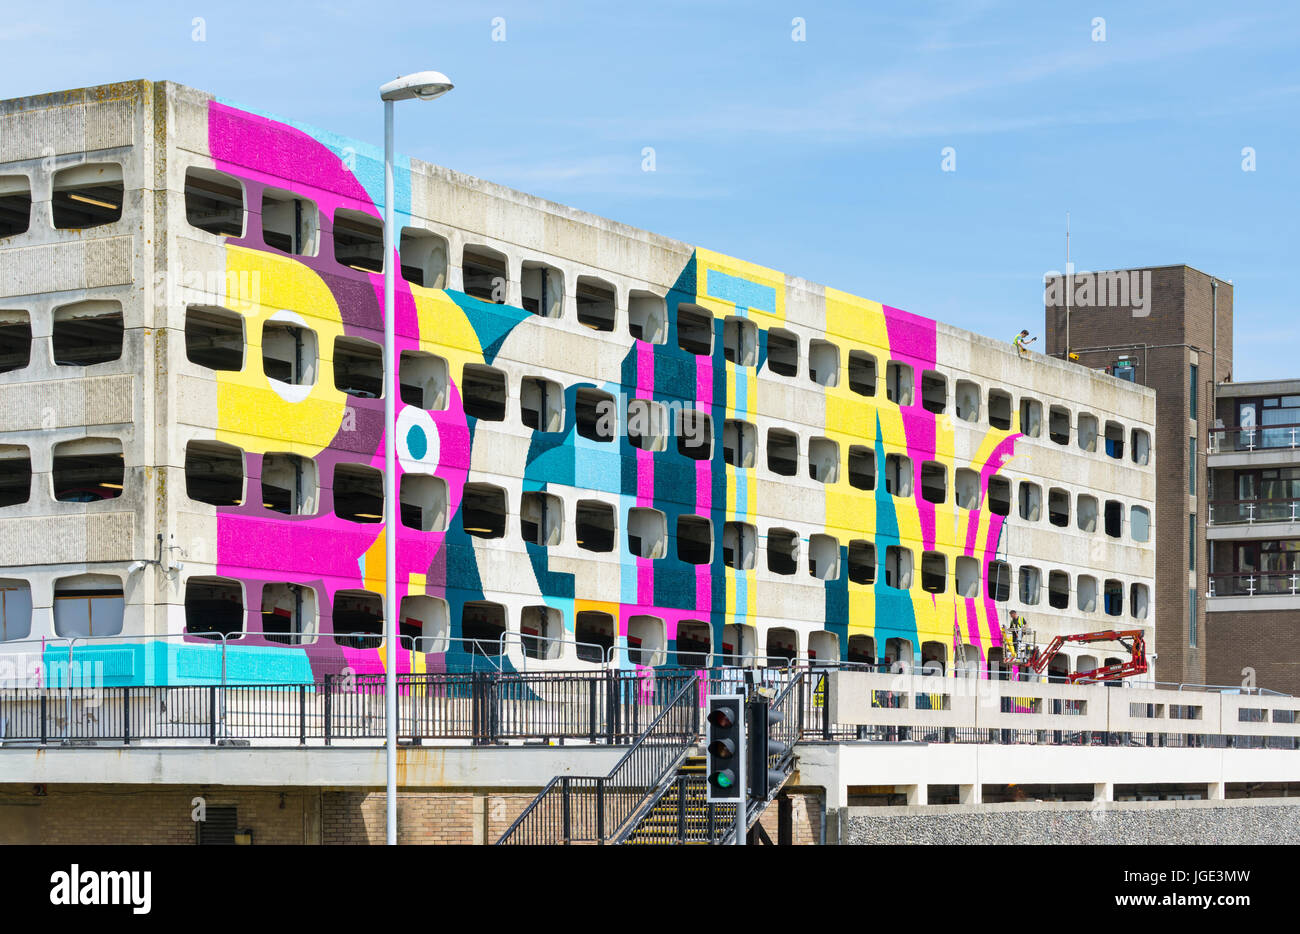 Grafton multi-storey car park being painted to become the UK's largest outdoor artwork. Grafton car park in Worthing, West Sussex, England, UK. Stock Photo